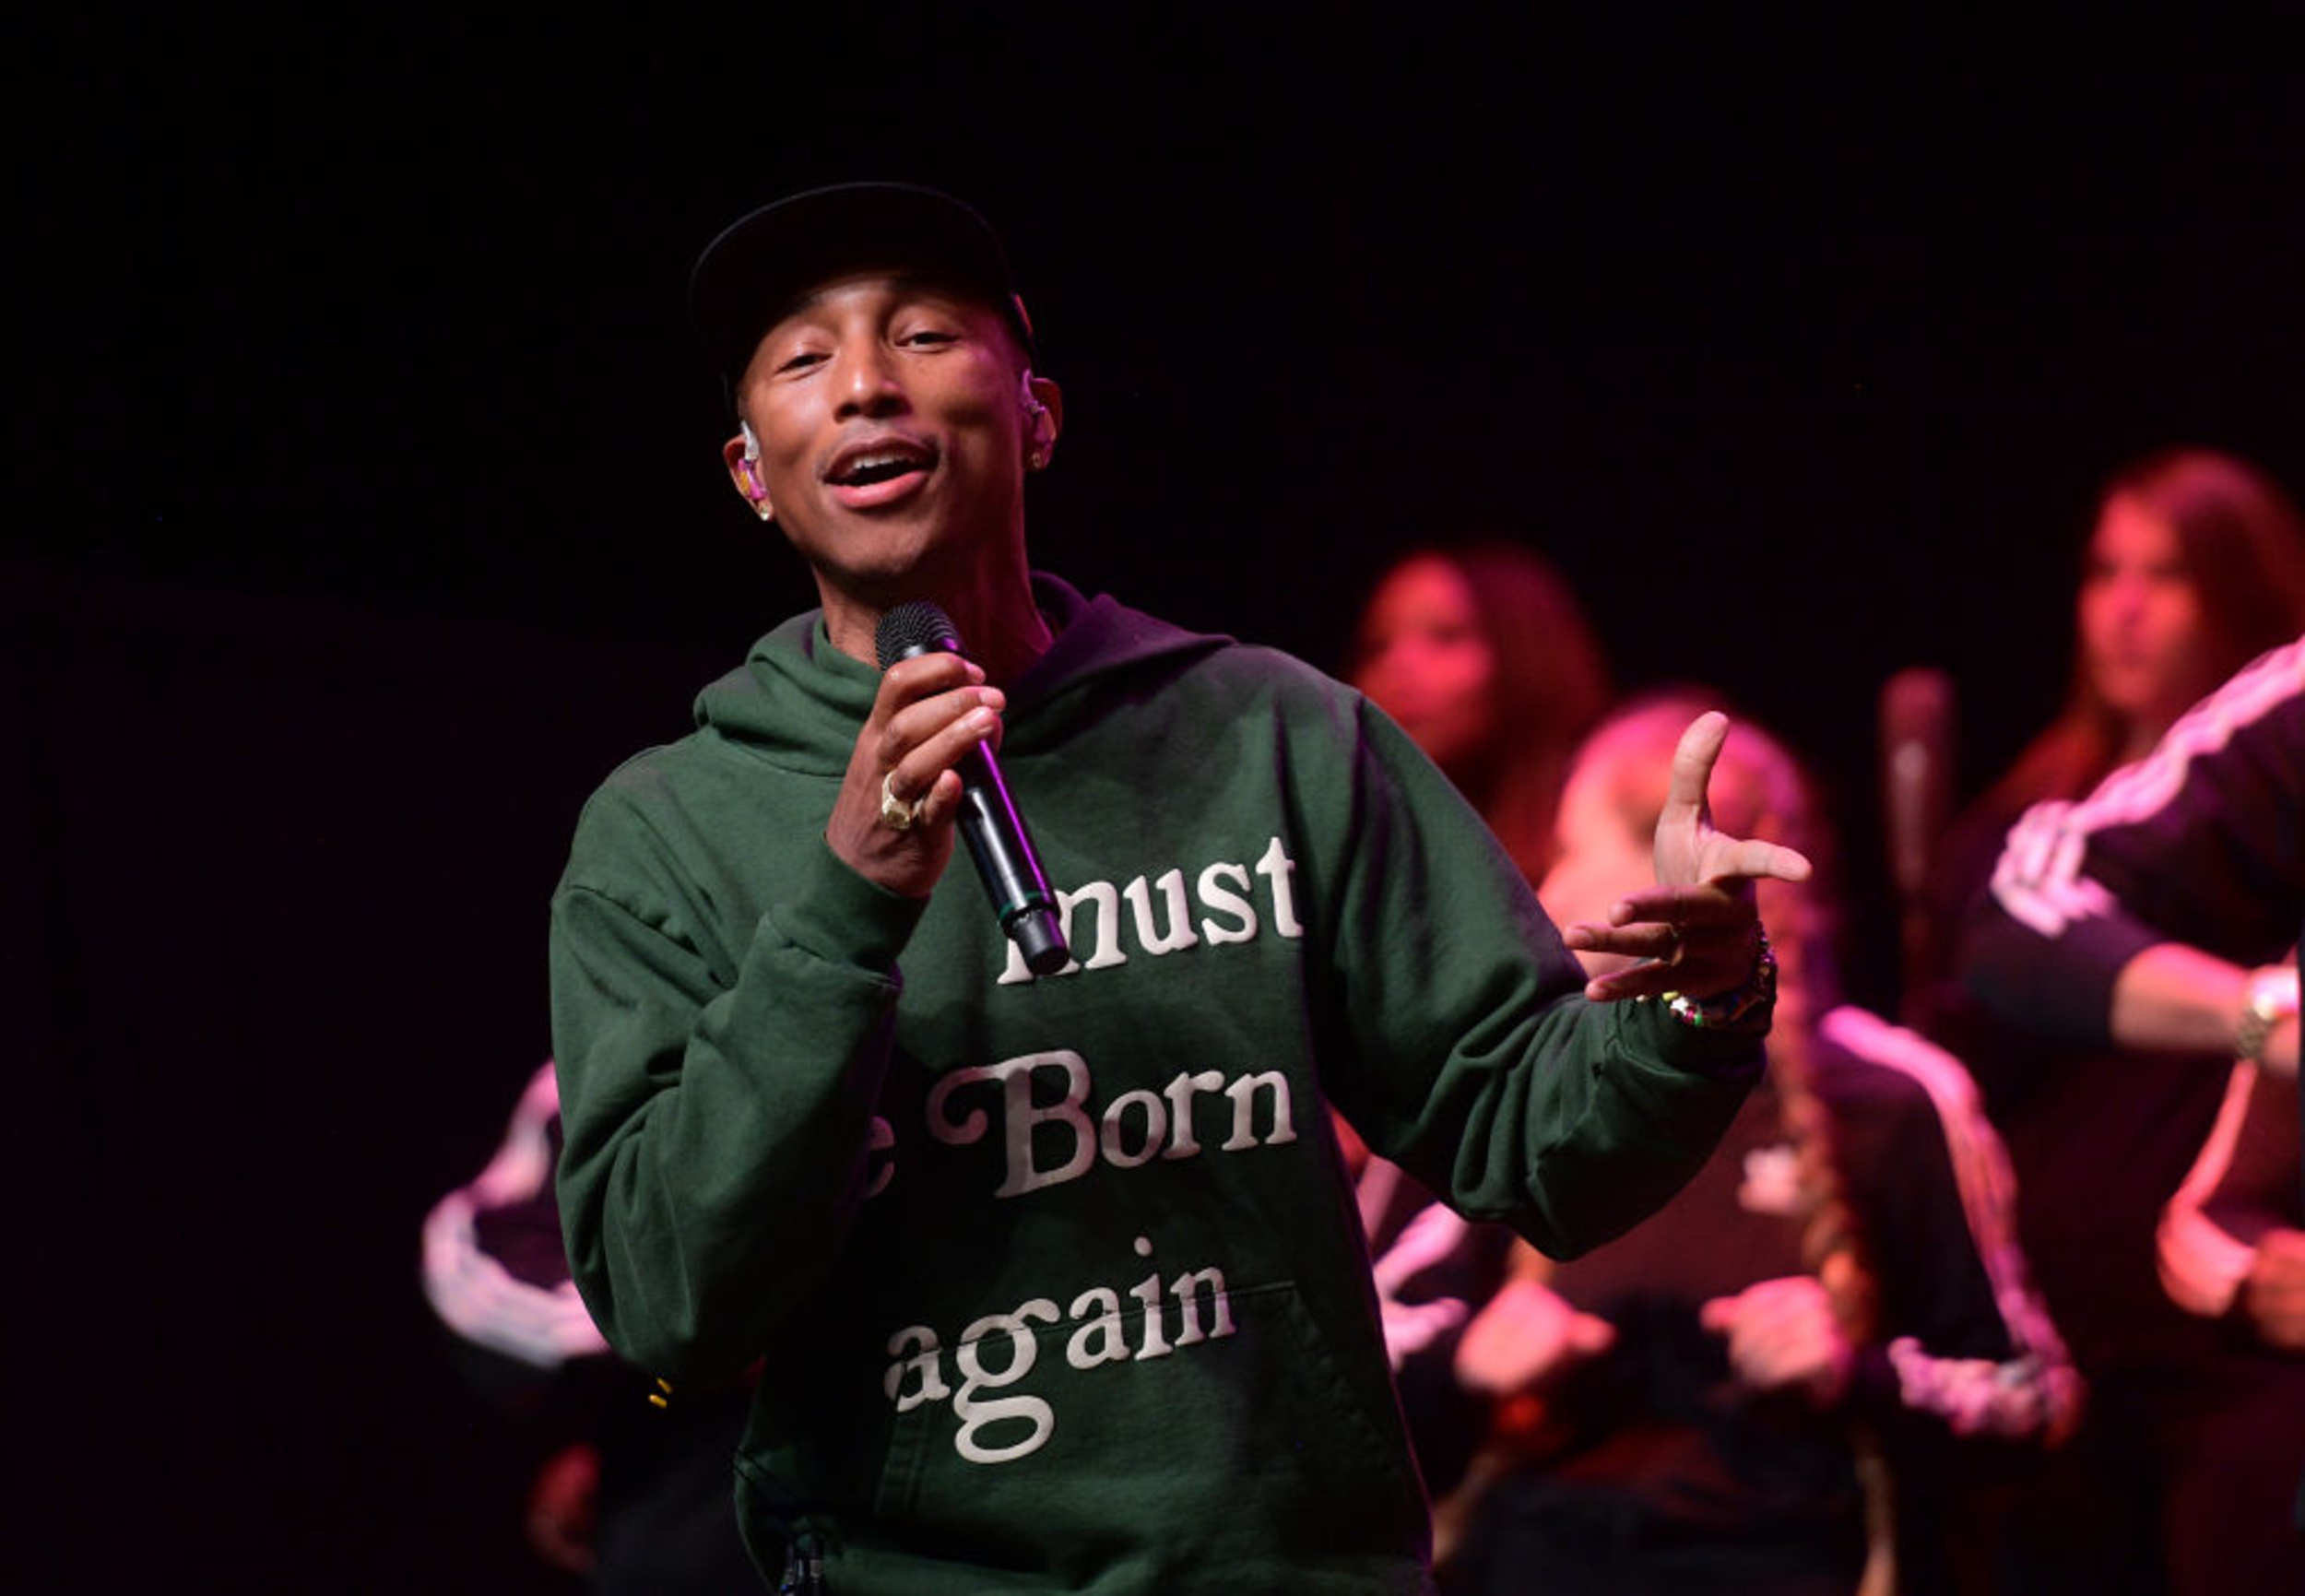 <p>In 2013, Pharrell Williams gave the world a joyful anthem with his hit song <a href="https://www.youtube.com/watch?v=ZbZSe6N_BXs" rel="noopener noreferrer">“Happy.”</a> The feel-good song soared to the top of the charts, became the most successful song of 2014, and was deemed the world’s first 24-hour music video. It's safe to say it was the type of song that was hard to escape.</p><p>You may also like: <a href='https://www.yardbarker.com/entertainment/articles/the_25_best_live_albums_of_all_time_031524/s1__32892671'>The 25 best live albums of all time</a></p>